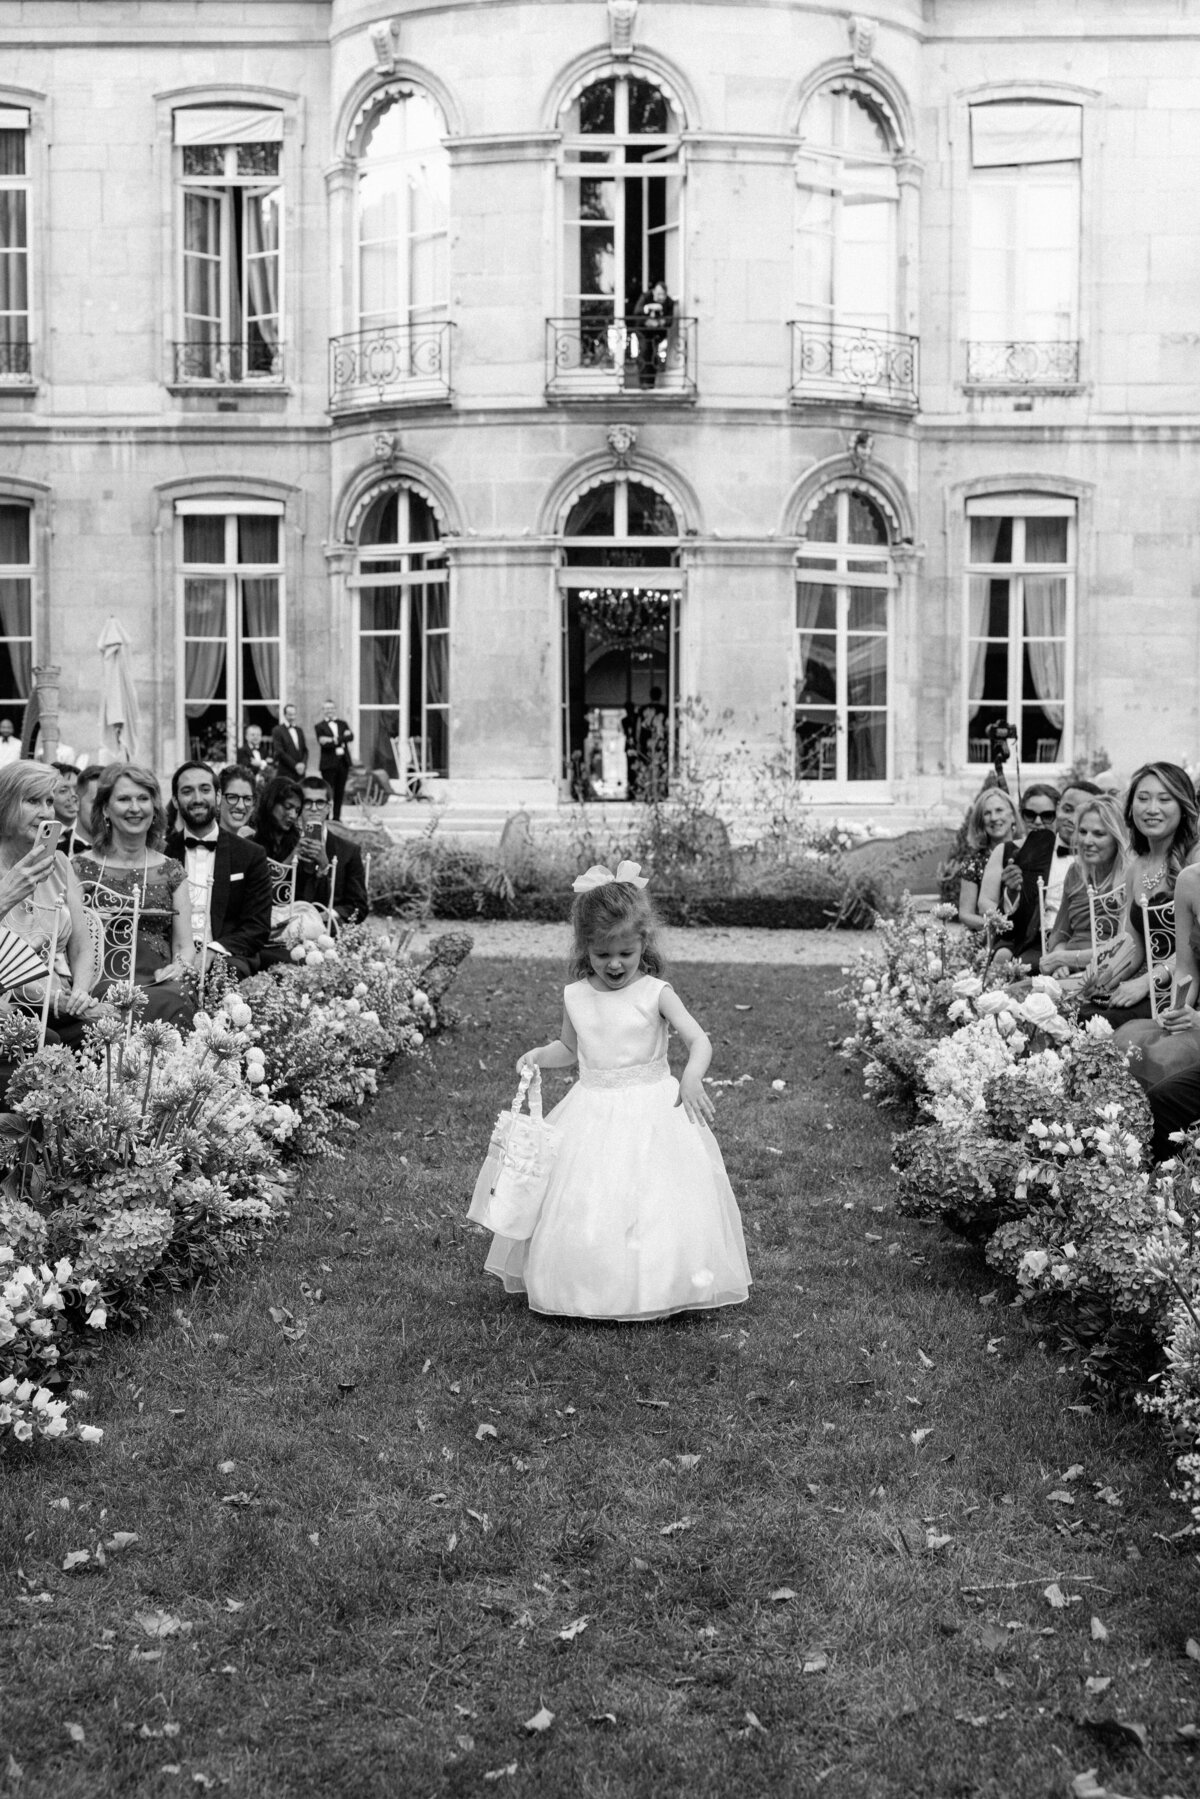 Jennifer Fox Weddings English speaking wedding planning & design agency in France crafting refined and bespoke weddings and celebrations Provence, Paris and destination wd489